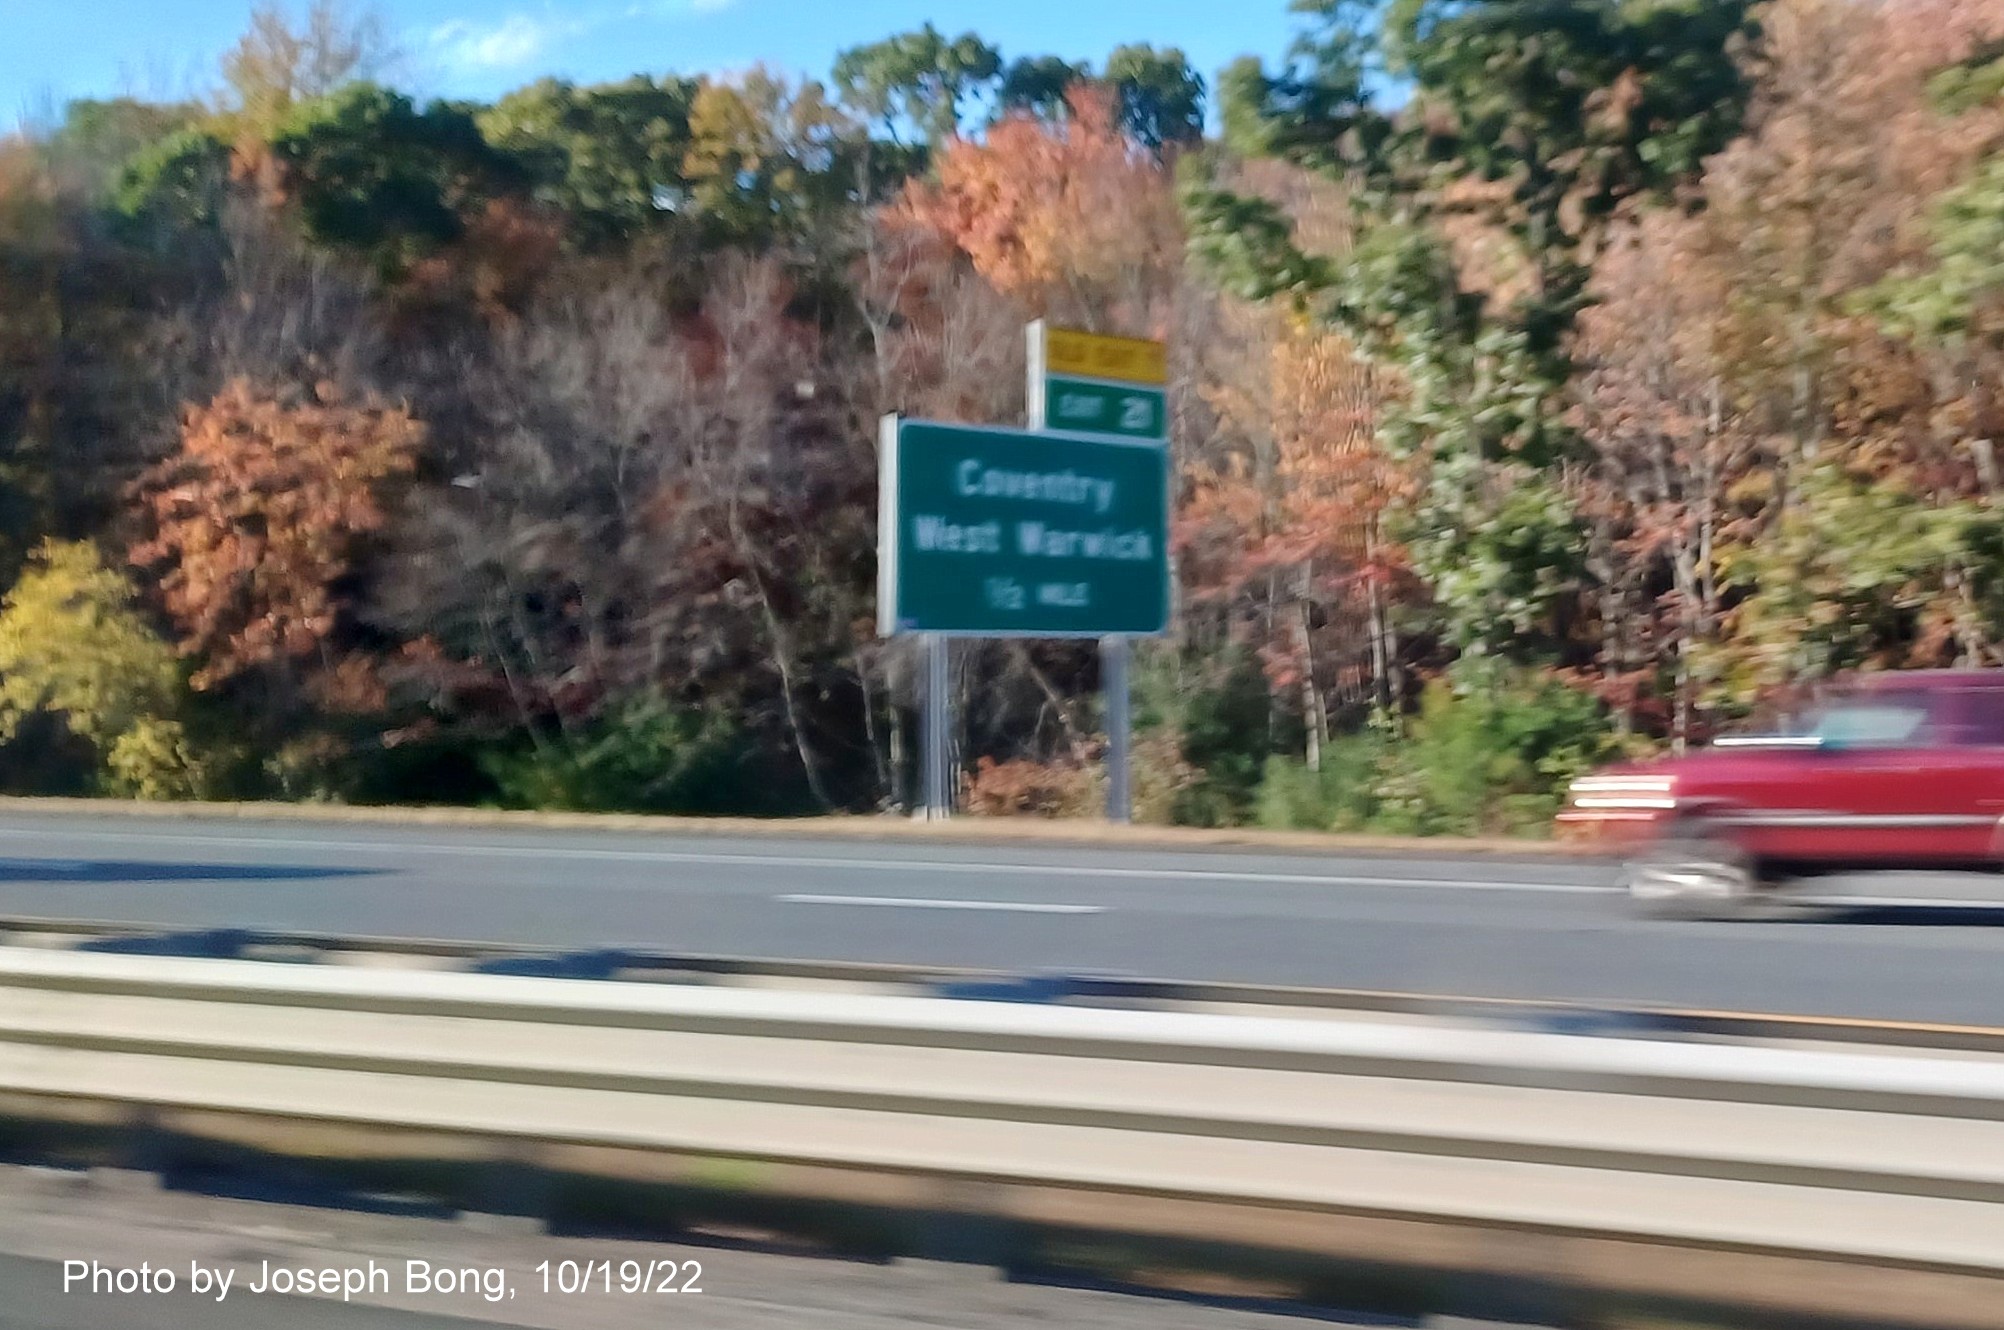 Image of 1/2 mile advance sign for Coventry/West Warwick exit with new milepost based exit number and yellow Old Exit 7 sign over exit tab on I-95 South,  by Joseph Bong, October 2022